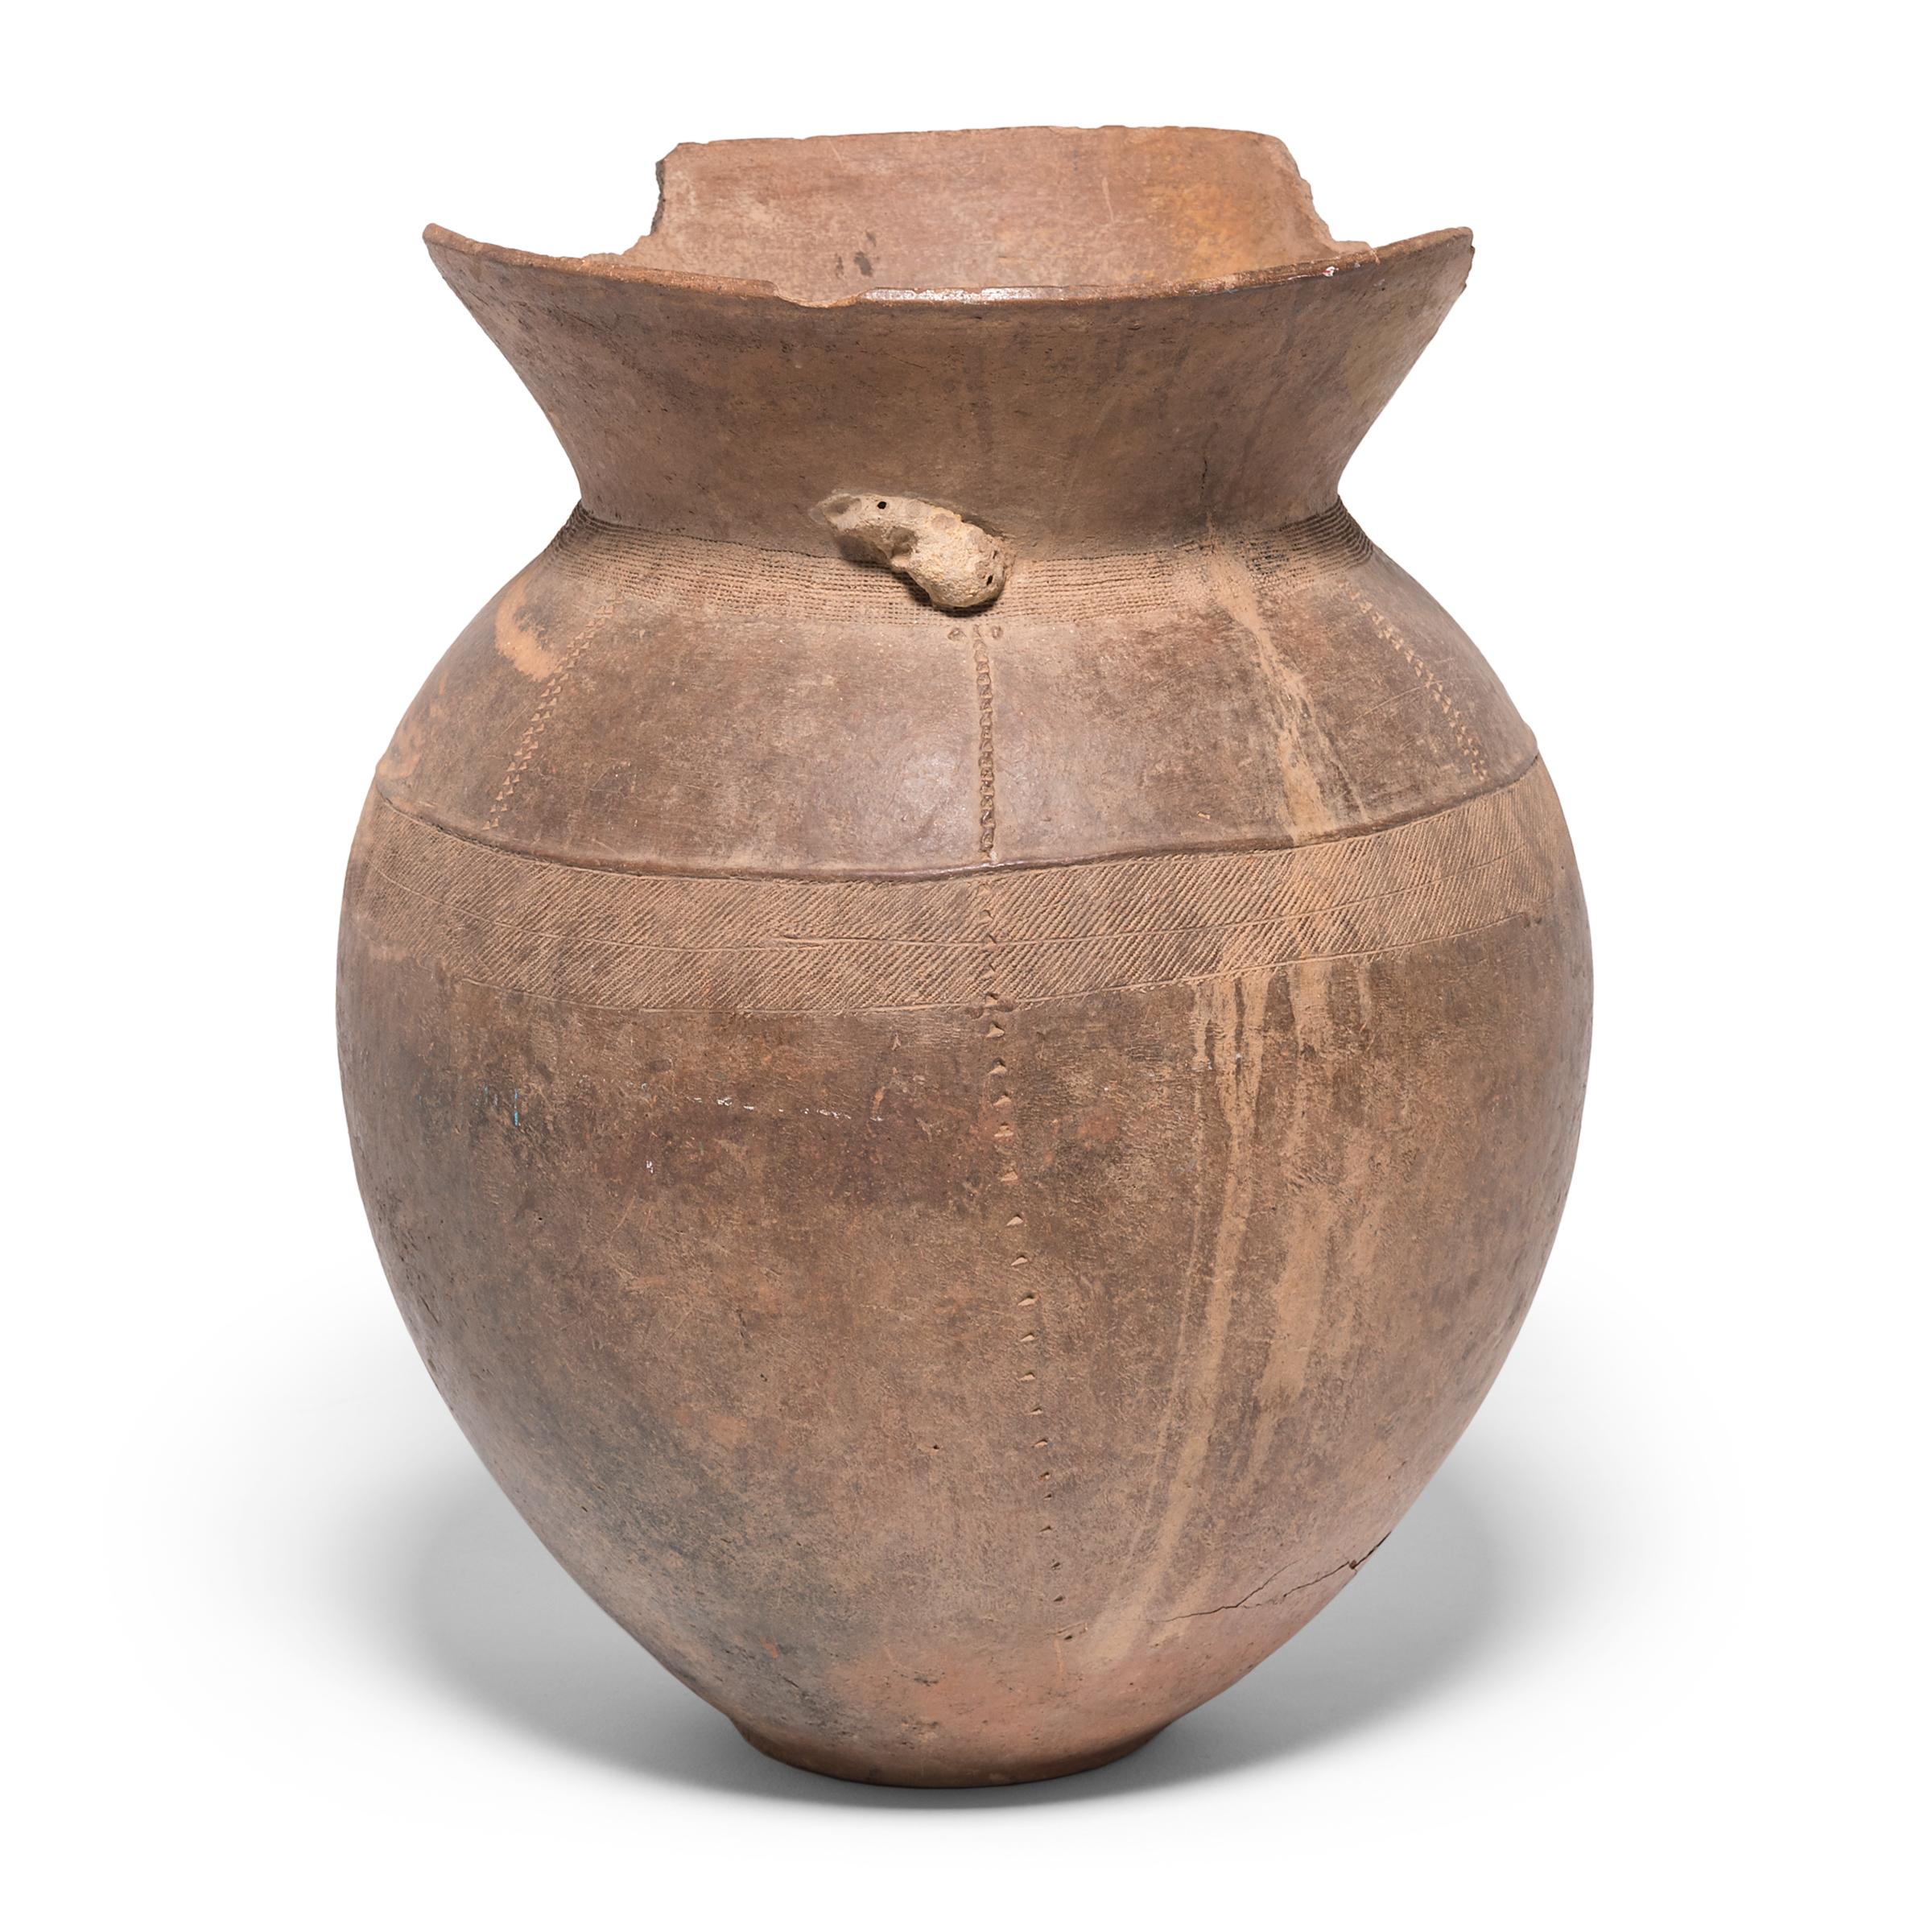 The Nupe people of Nigeria were known as some of the finest ceramicists in Africa. Everyday objects, like this storage vessel, received detailed attention. Likely used to hold grain and other dry foods, the vessel's varied textures come from its